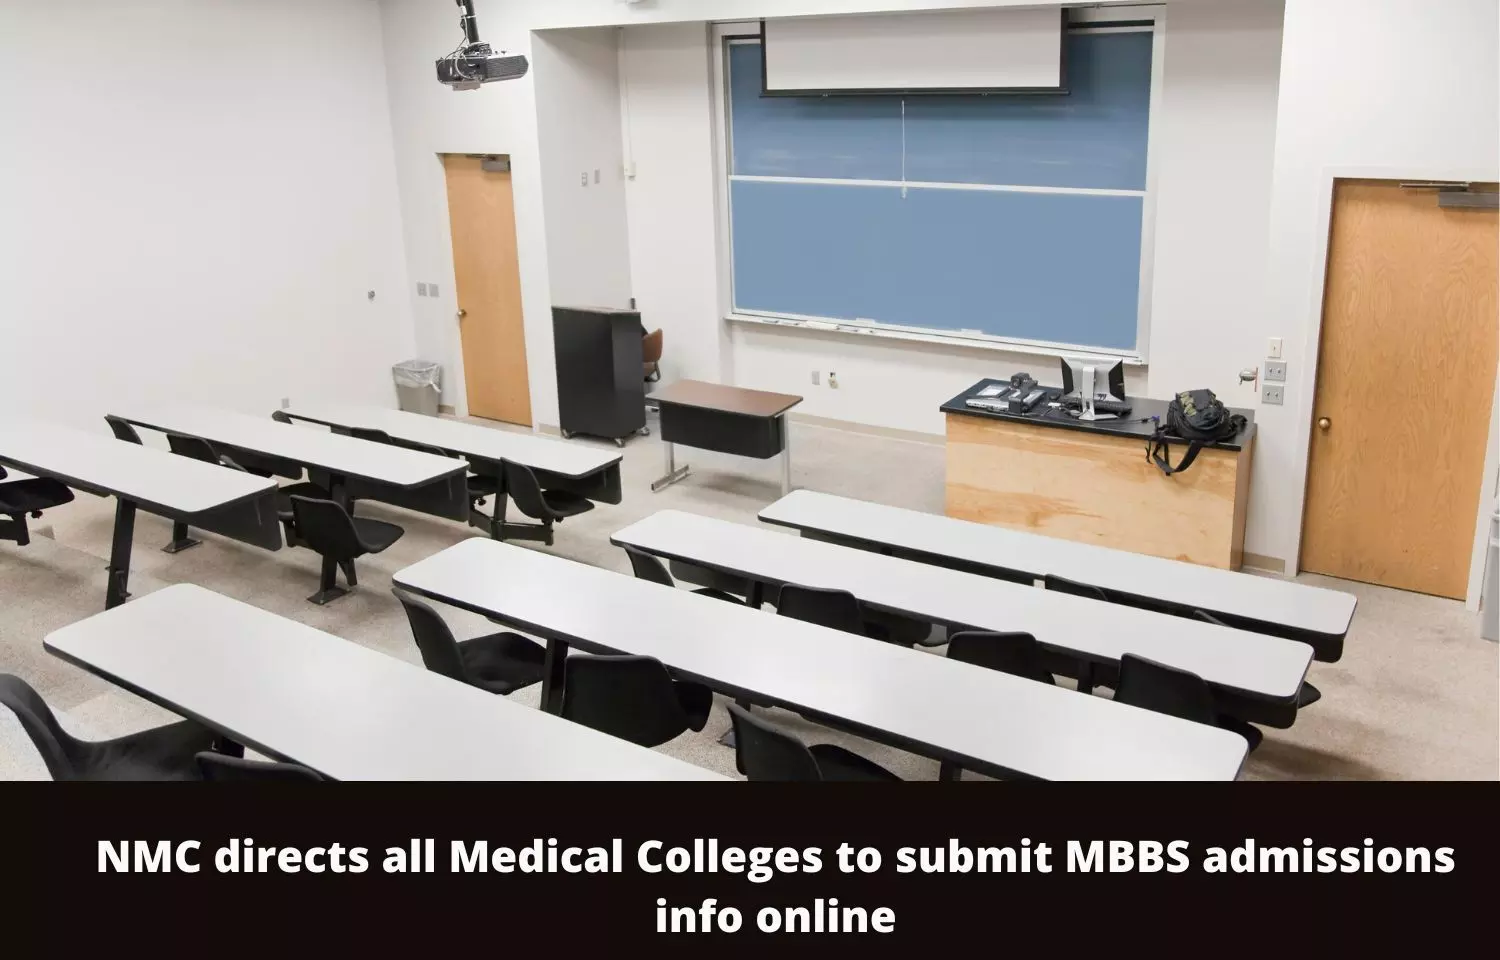 Submit MBBS admissions info online: NMC directs all medical colleges